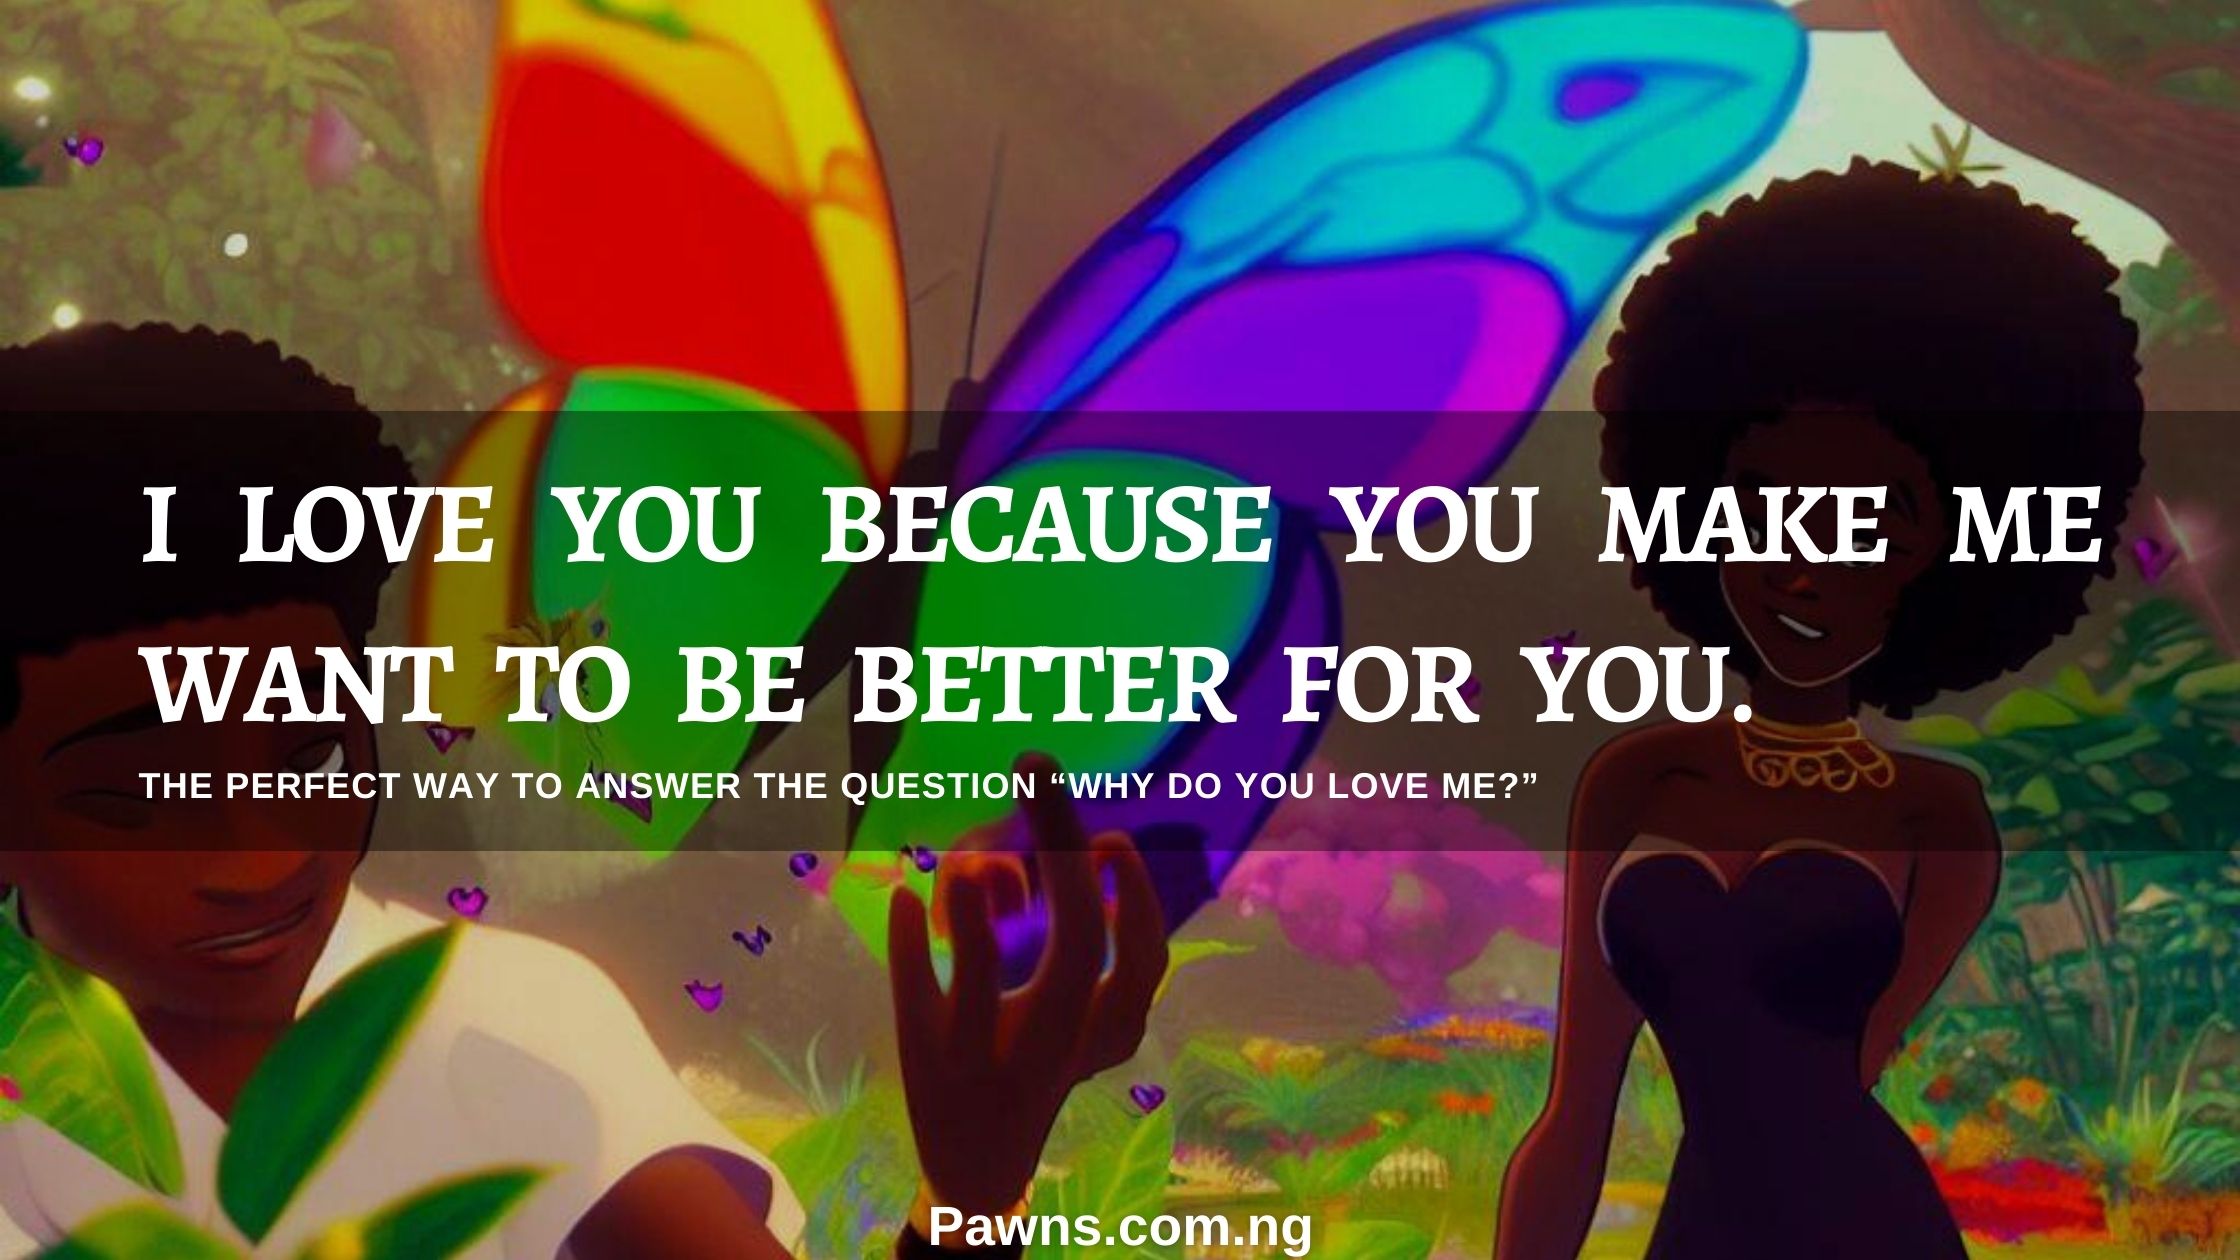 I love you because you make me want to be better for you. The Perfect Way To Answer The Question “Why Do You Love Me”